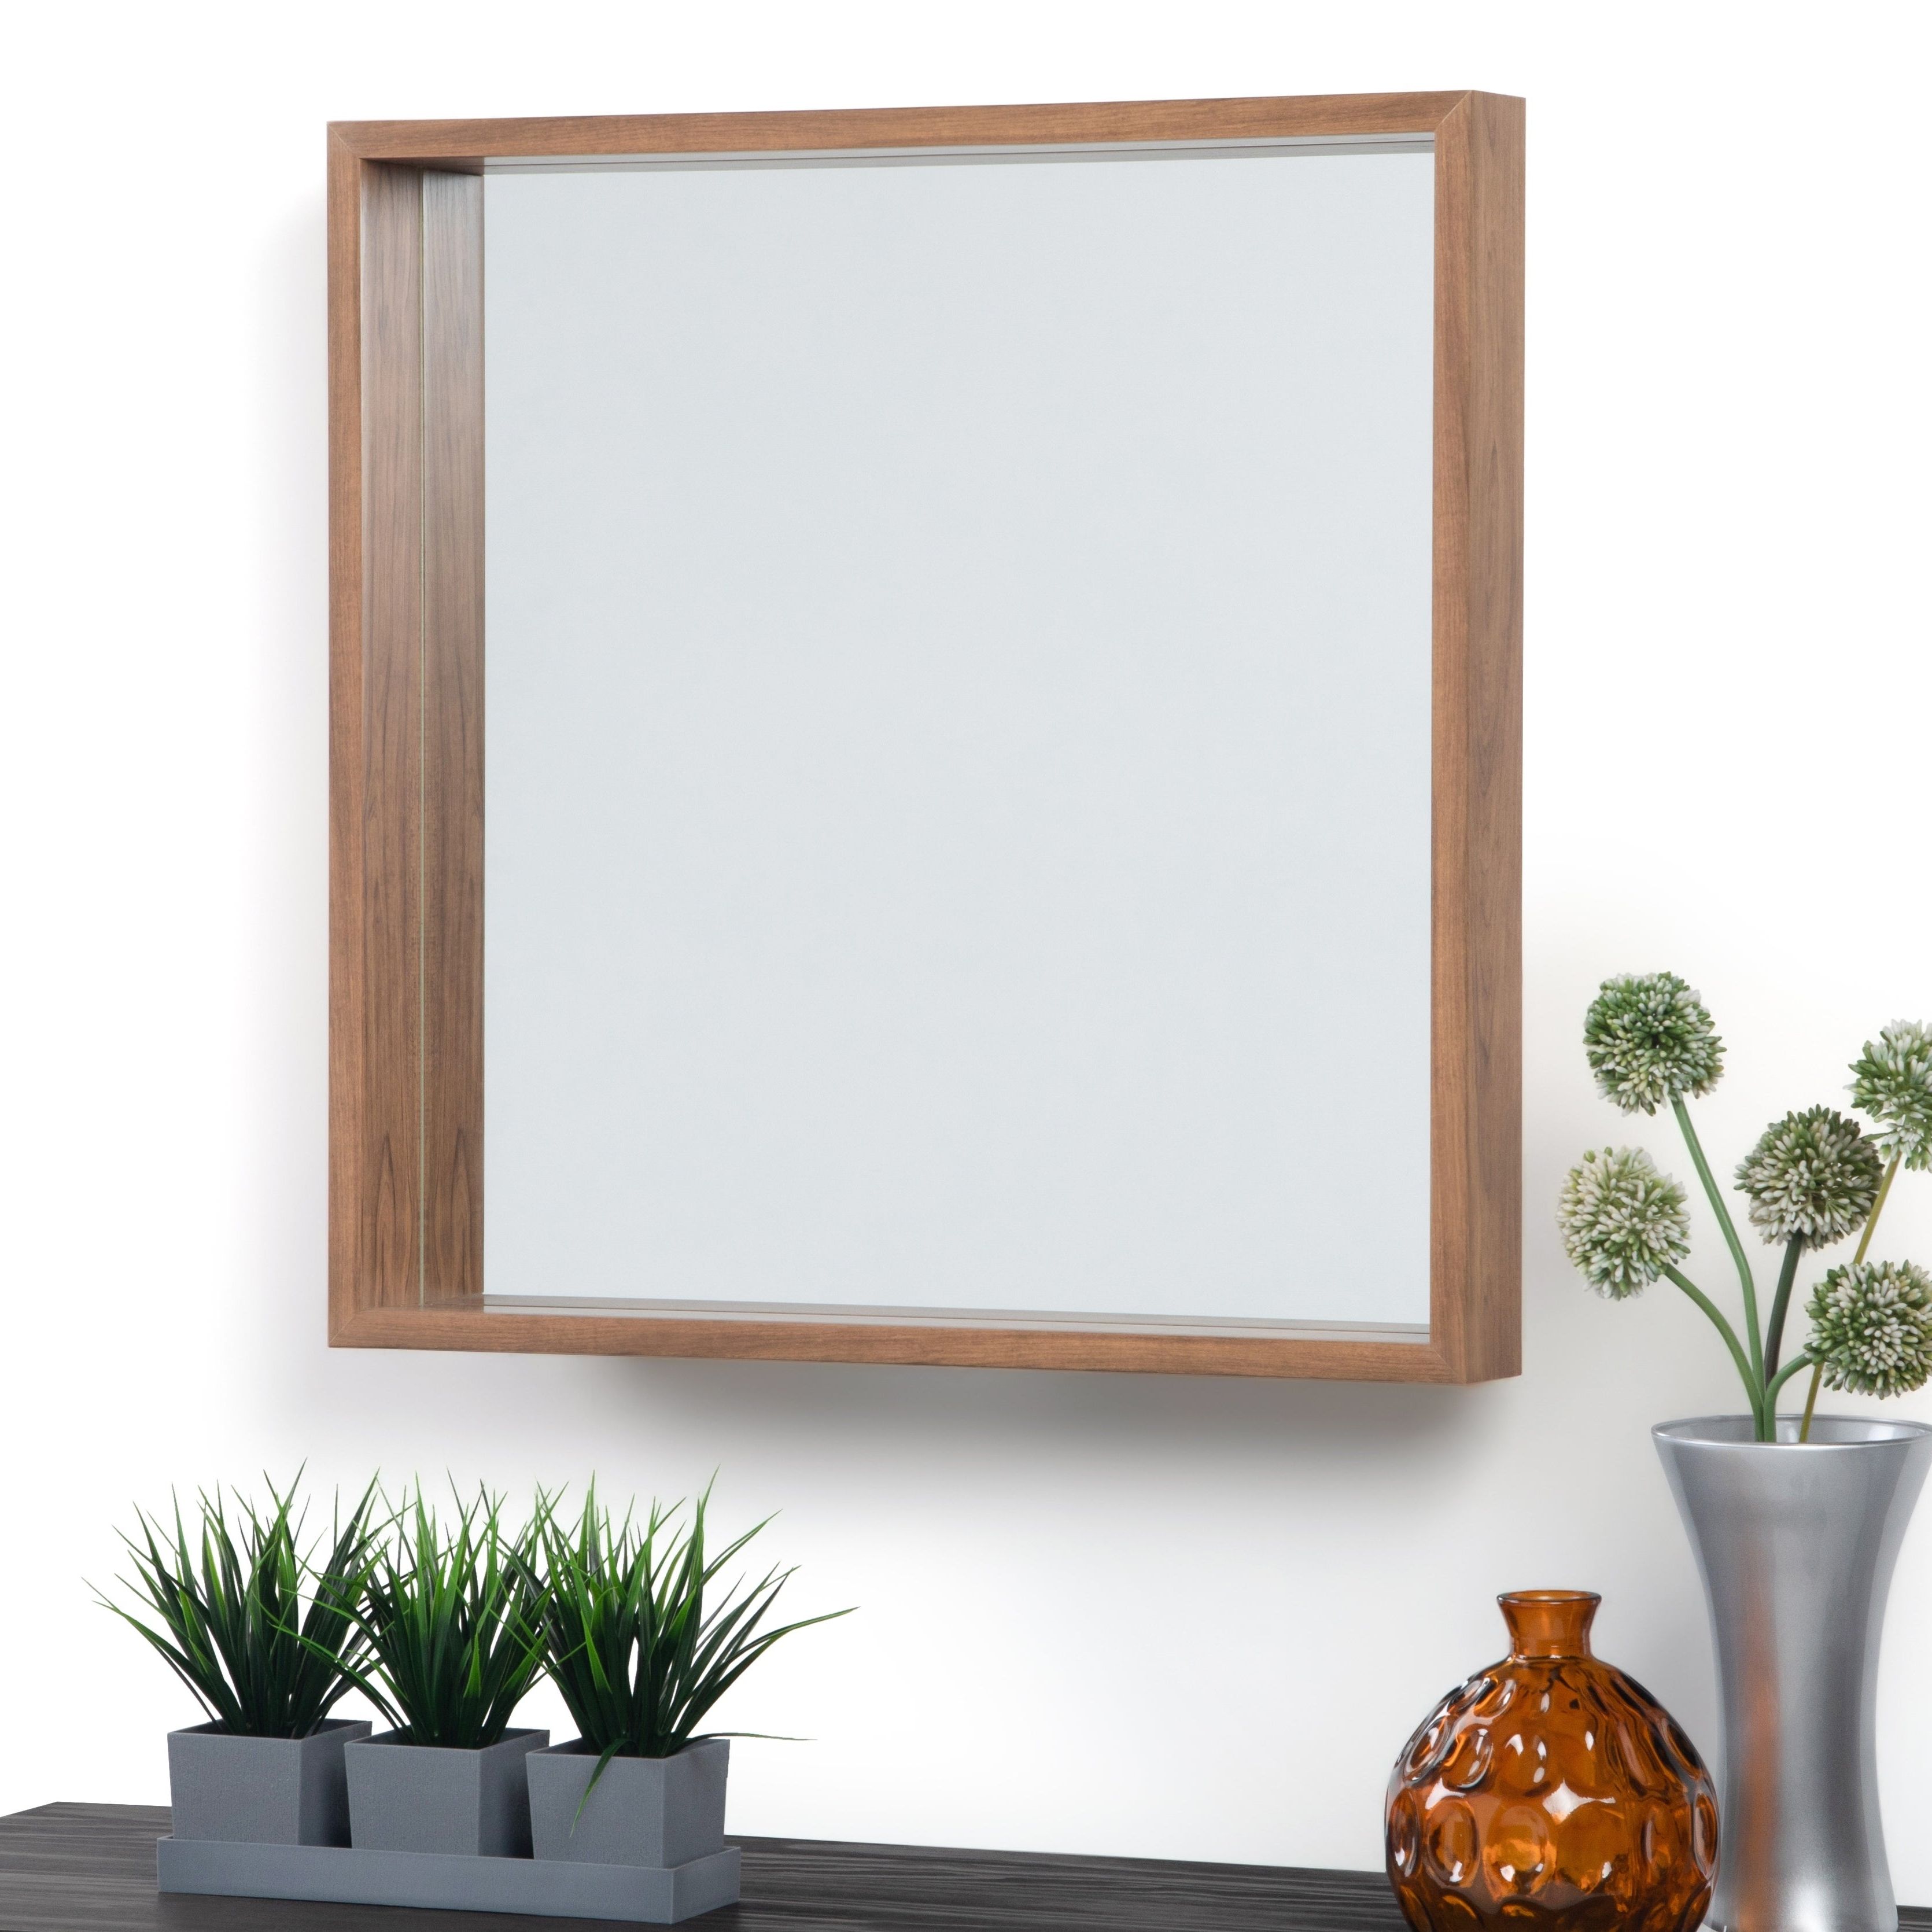 Lidya Frameless Beveled Wall Mirrors Inside Current Buy Glass, Square Mirrors Online At Overstock (View 18 of 20)